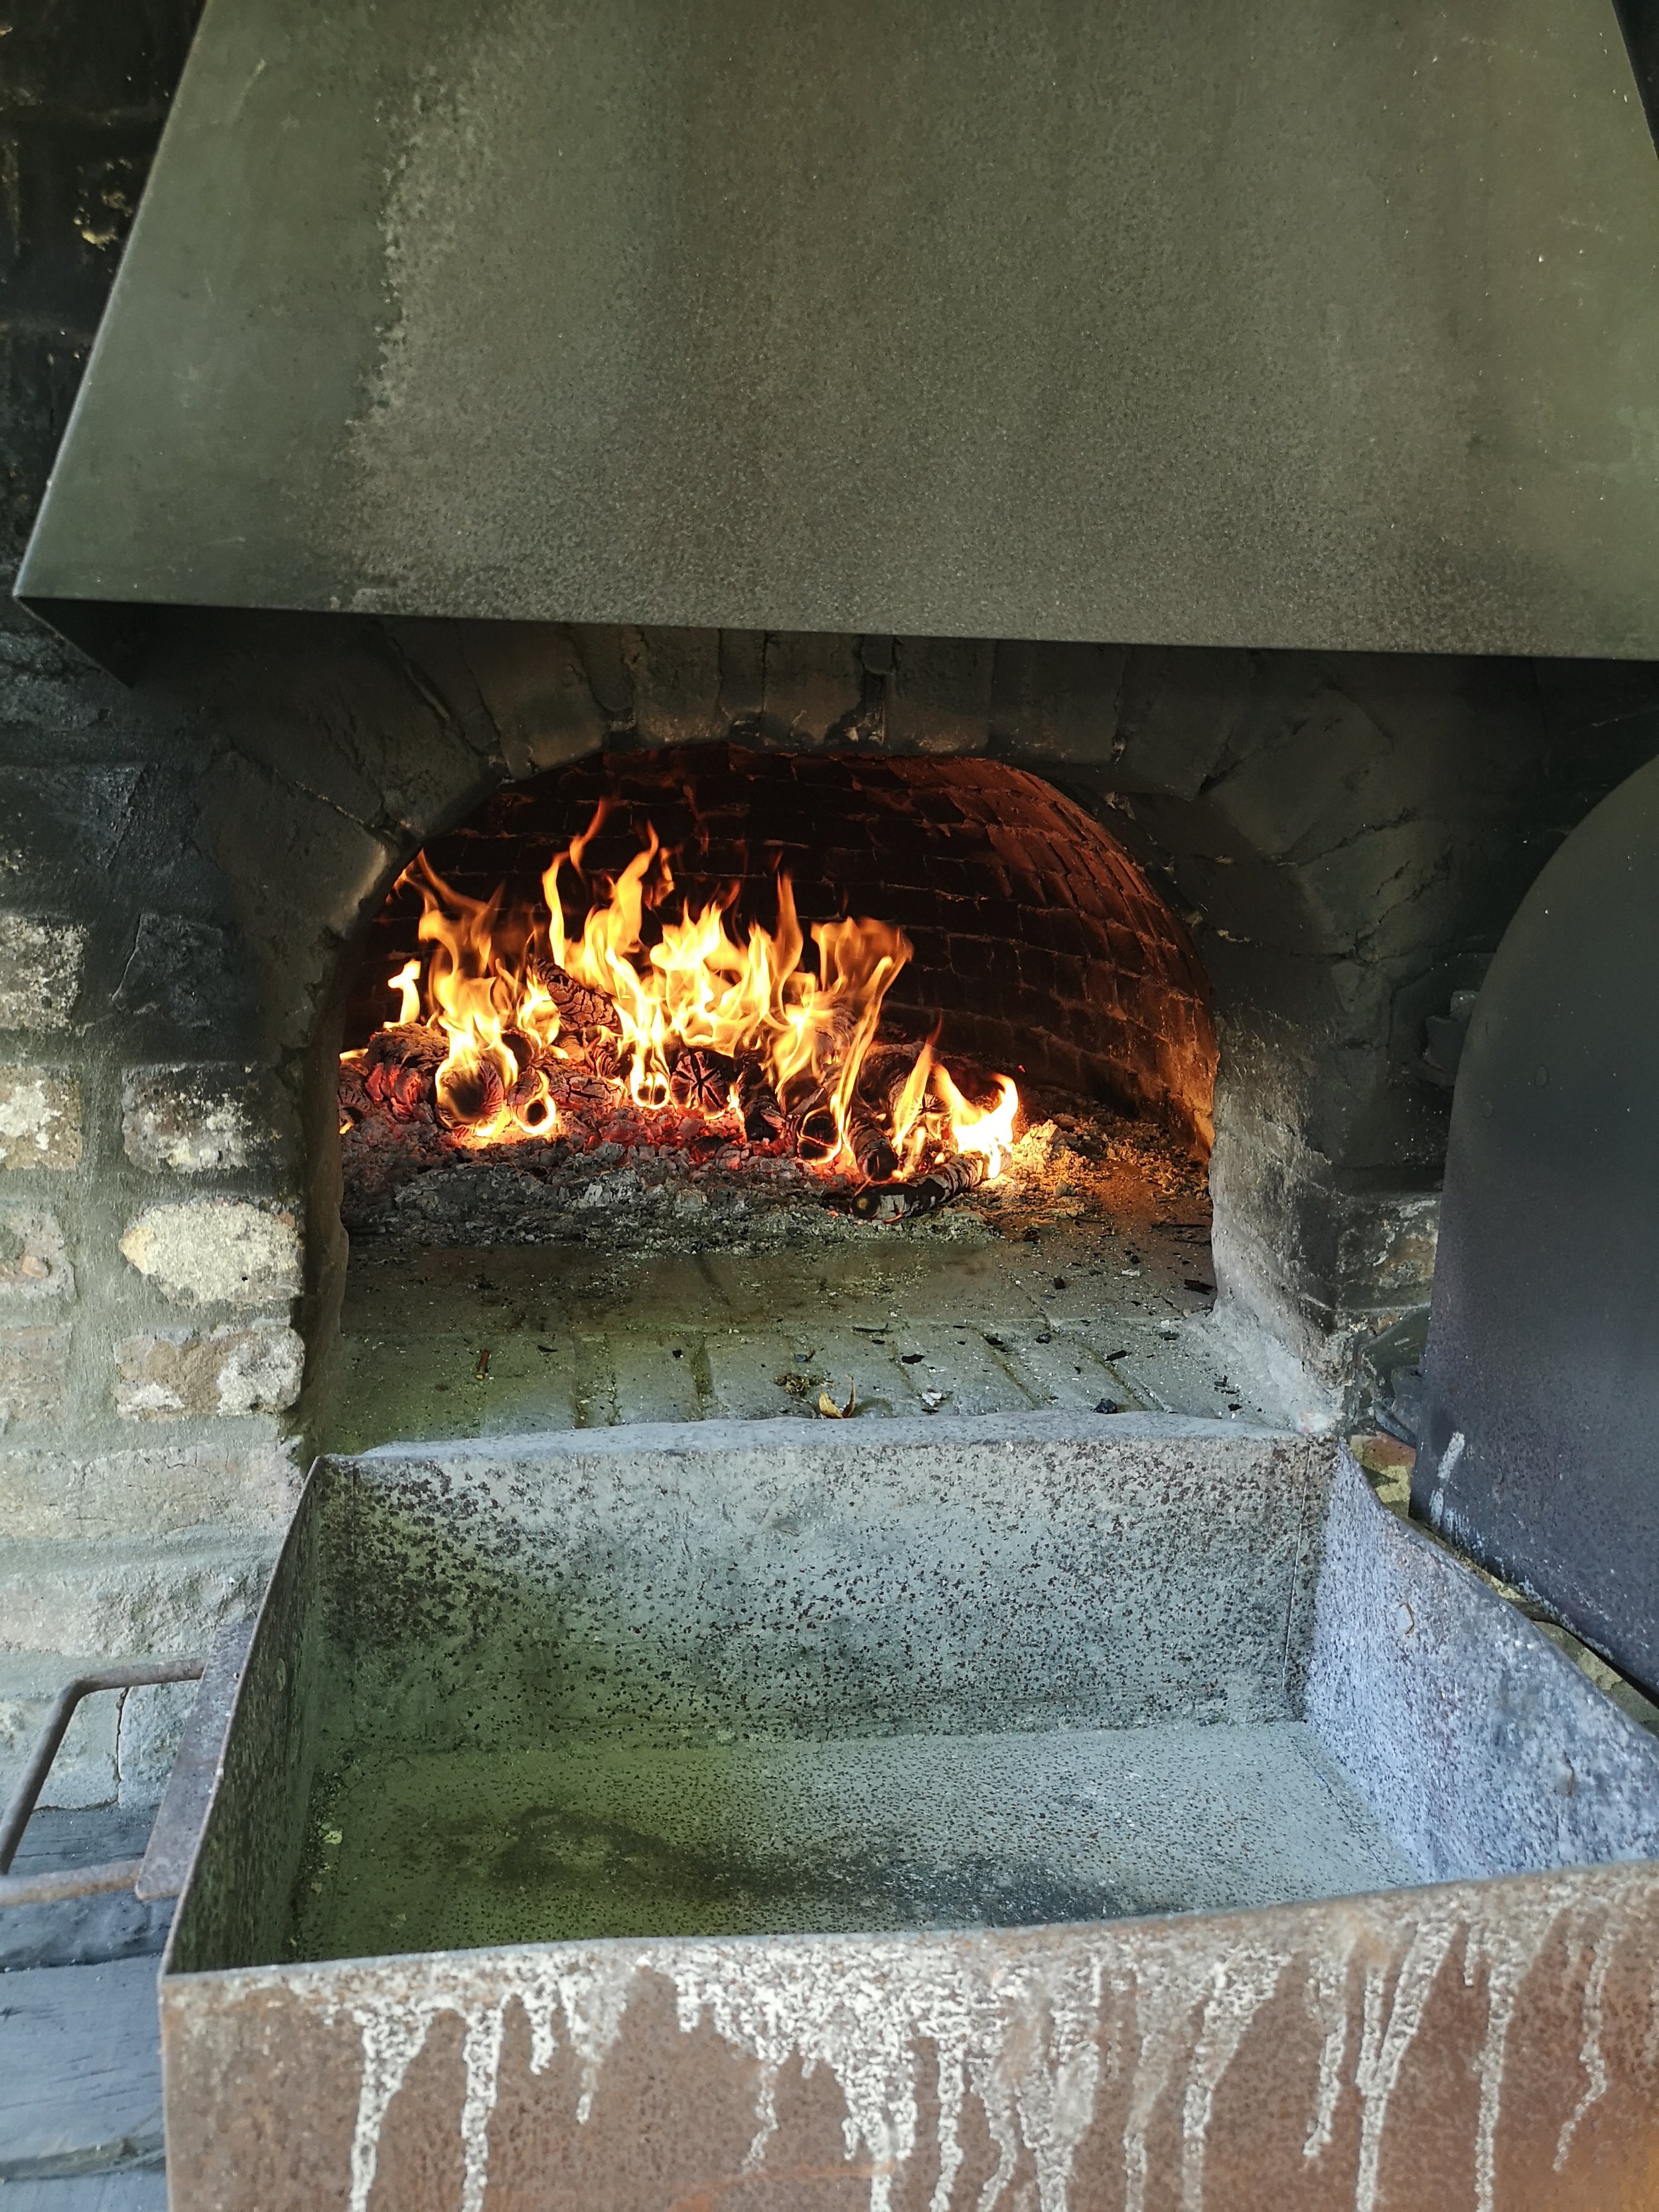 Outdoor oven for baking bread